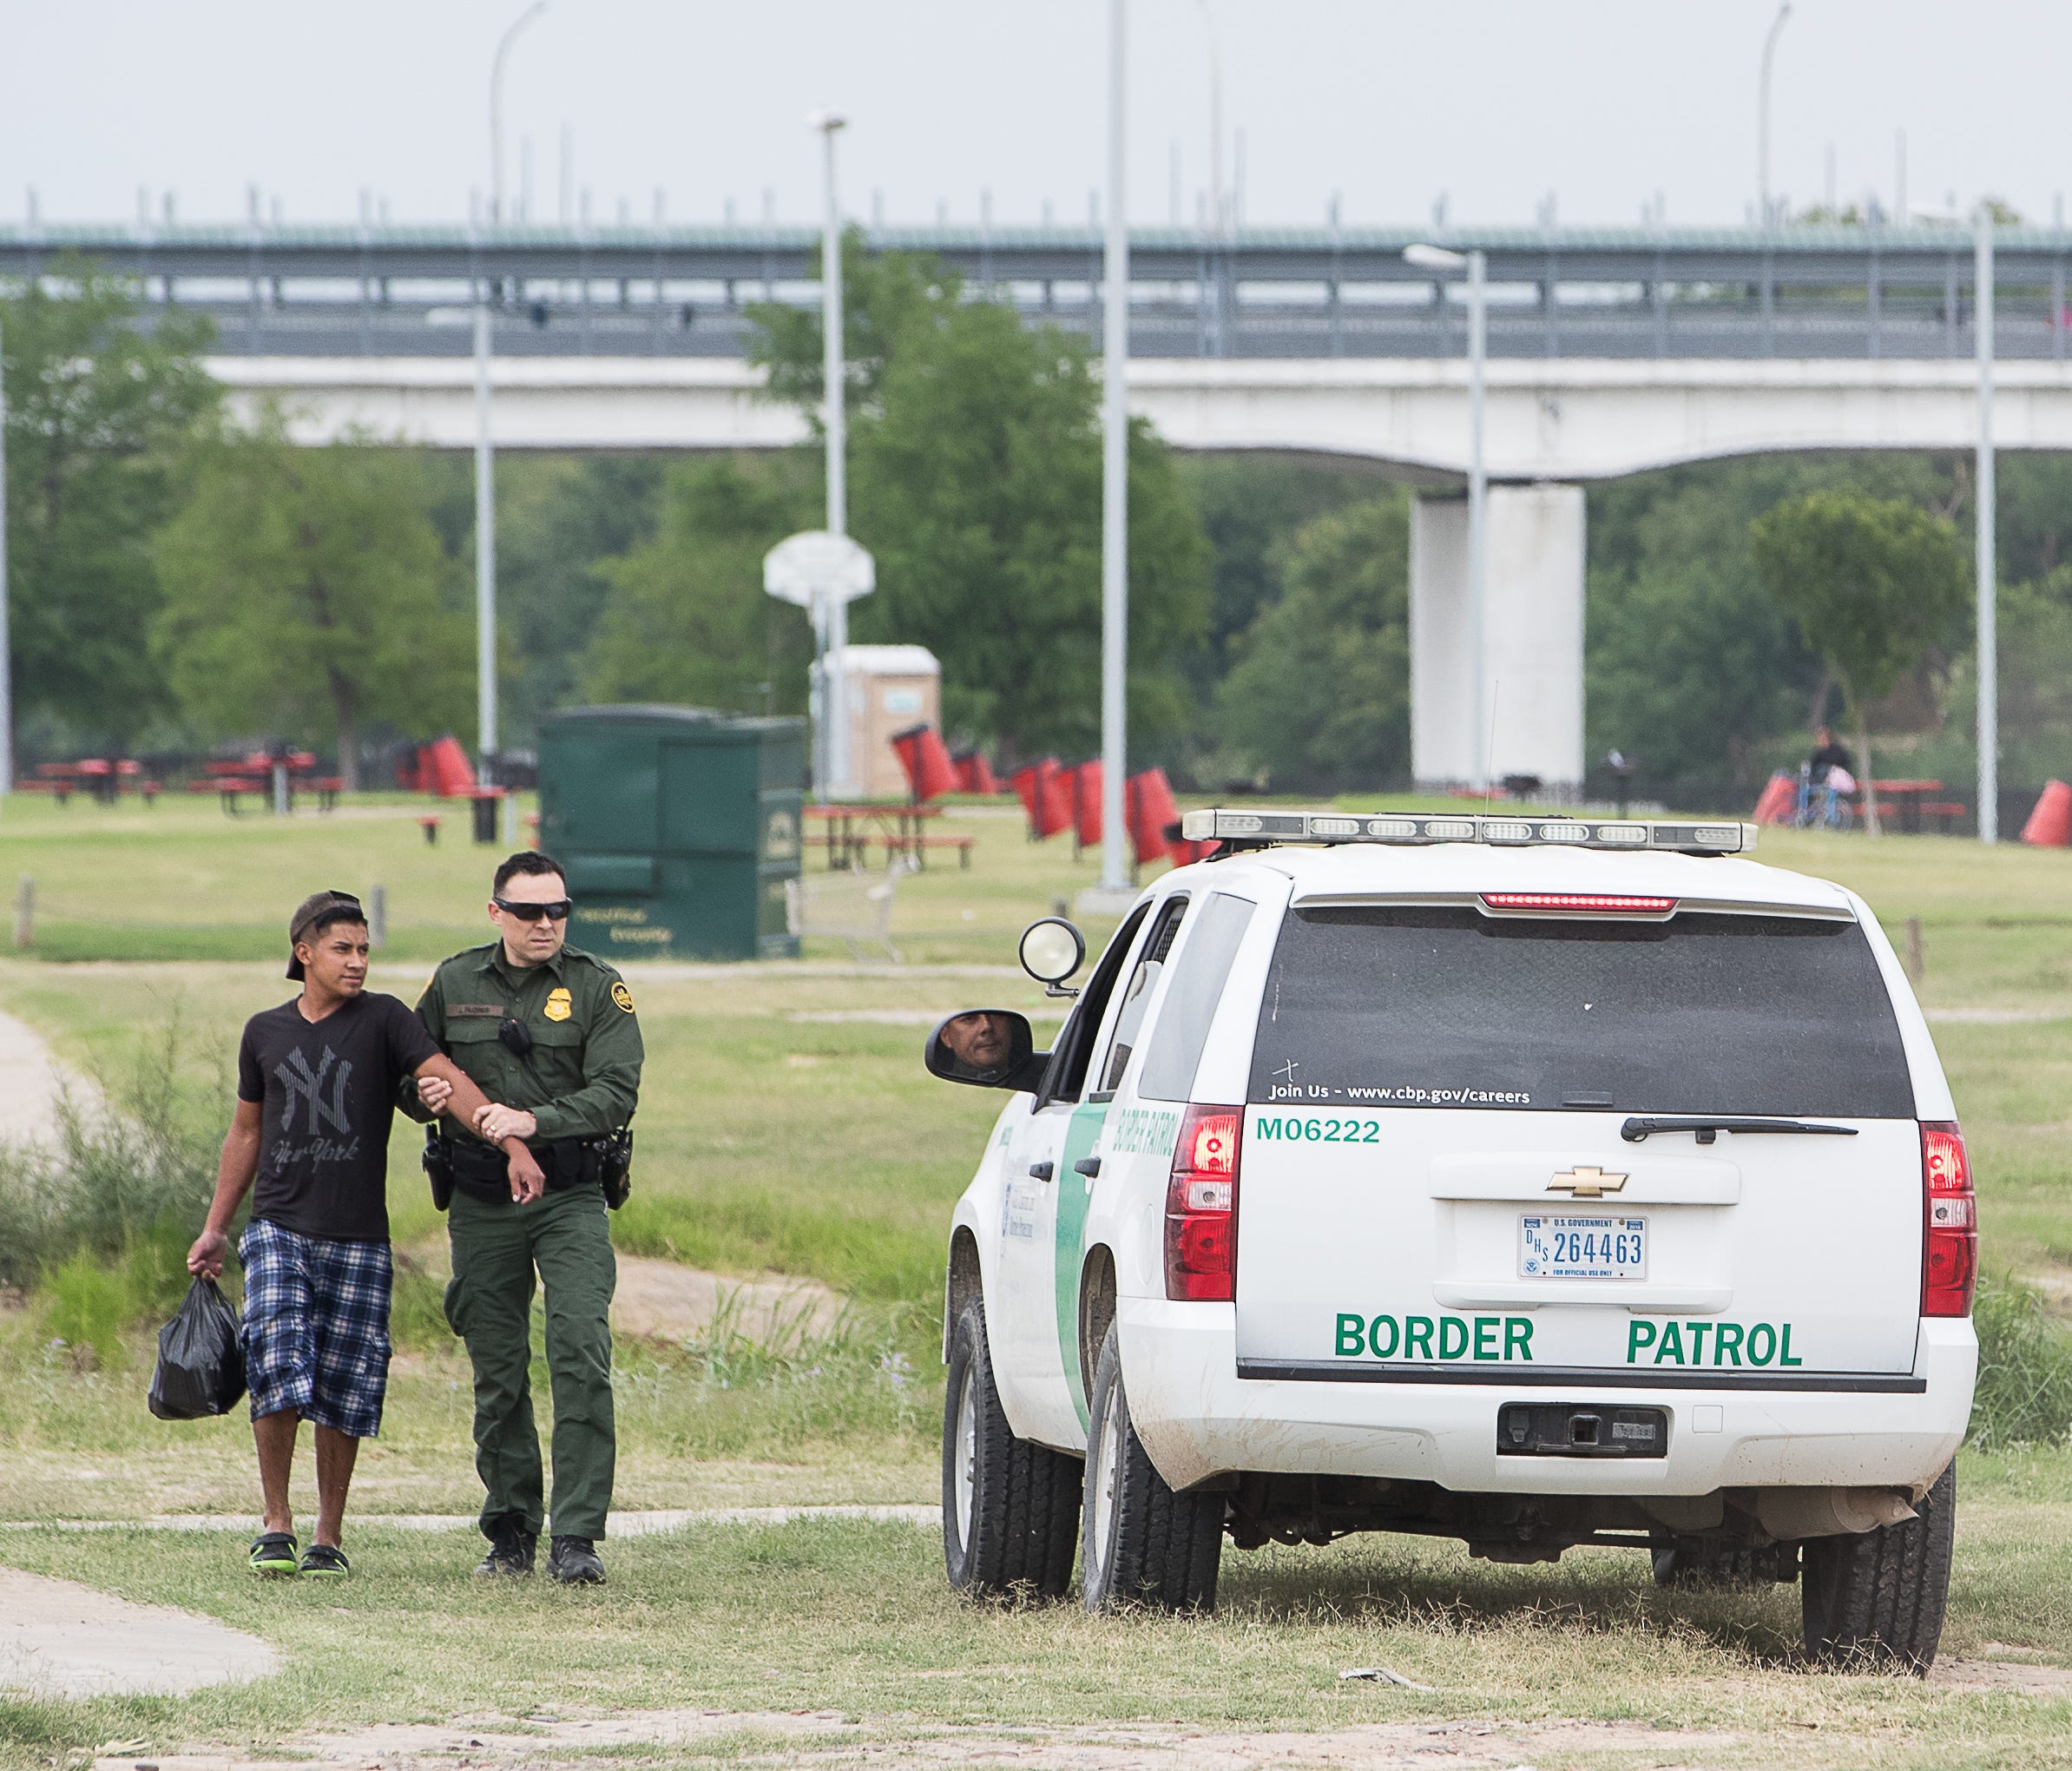 A United States Border Patrol agent catches a man along the banks of the Rio Grande after watching him illegally cross the river from Mexico into the United States in Laredo, Texas on April 9, 2018.